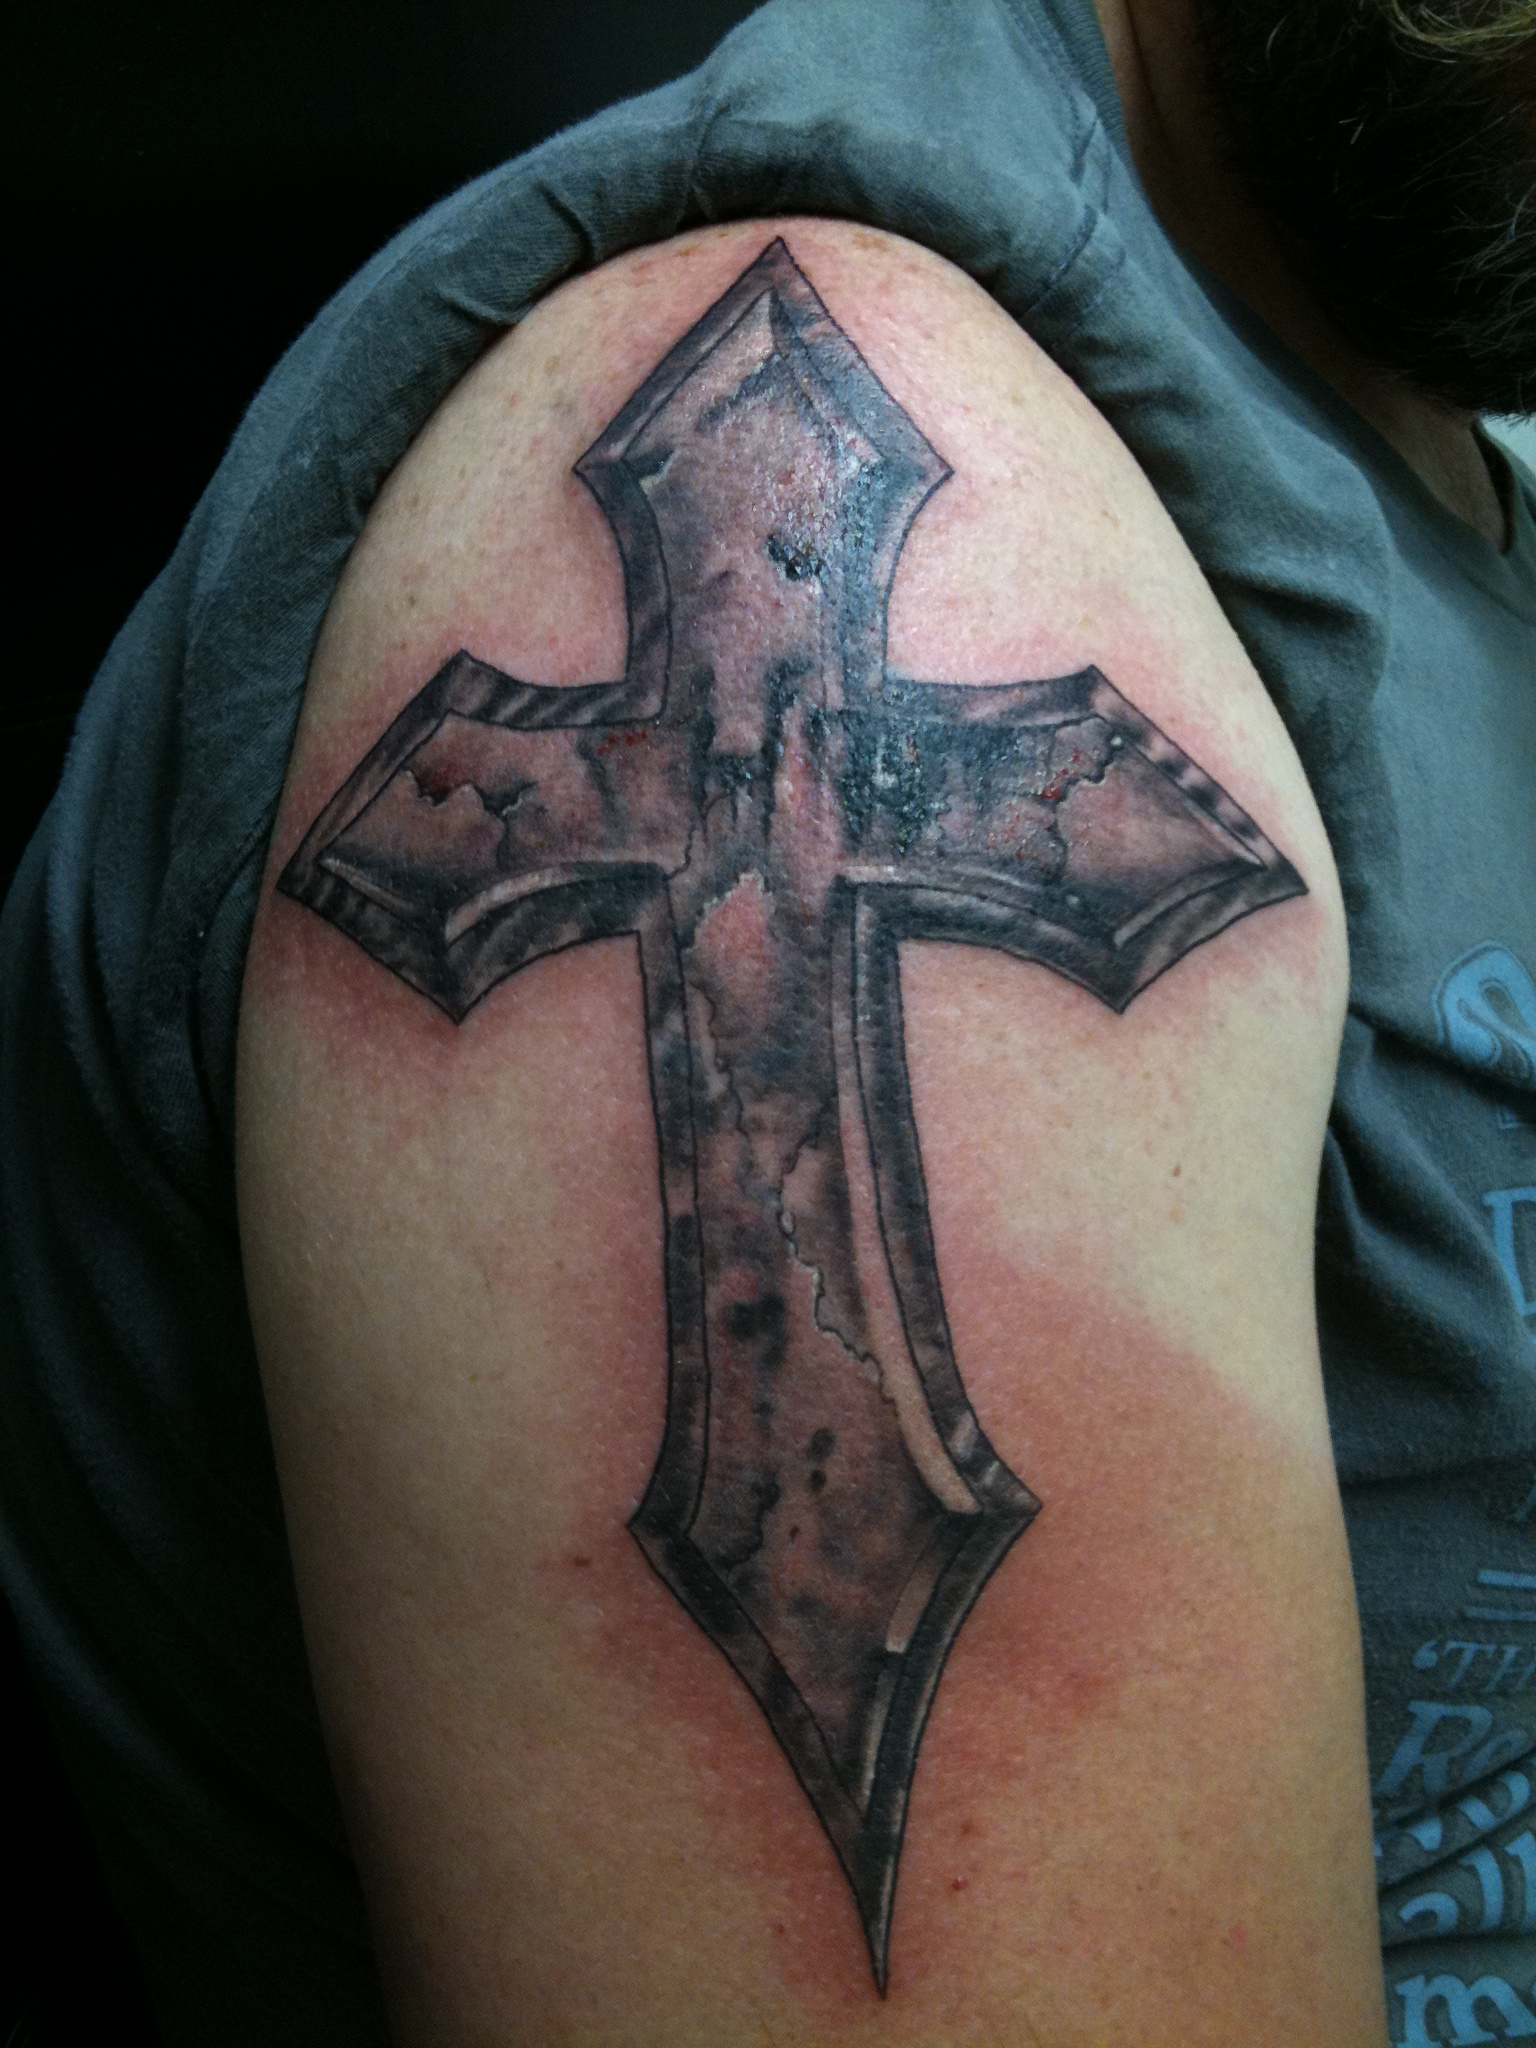 90 DIFFERENT STYLES OF MAKING A CROSS TATTOO Godfather Style